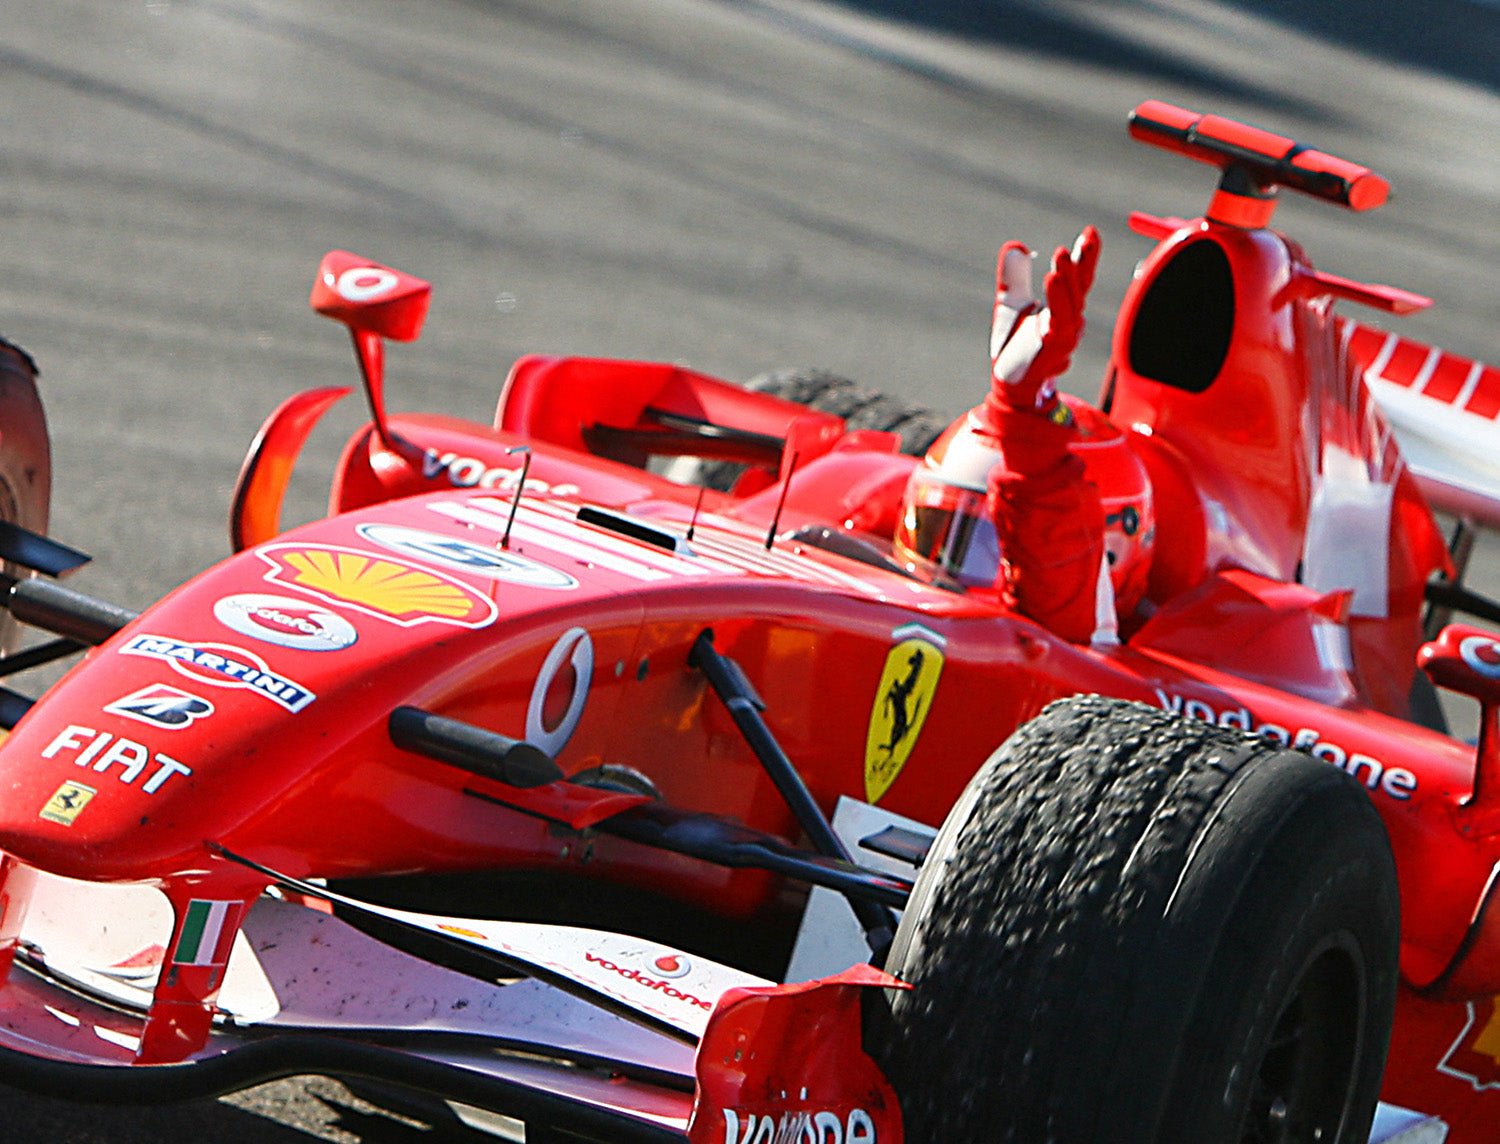 A Winning Ferrari Driven By Michael Schumacher Sold For A Huge Amount - DSF Antique Jewelry